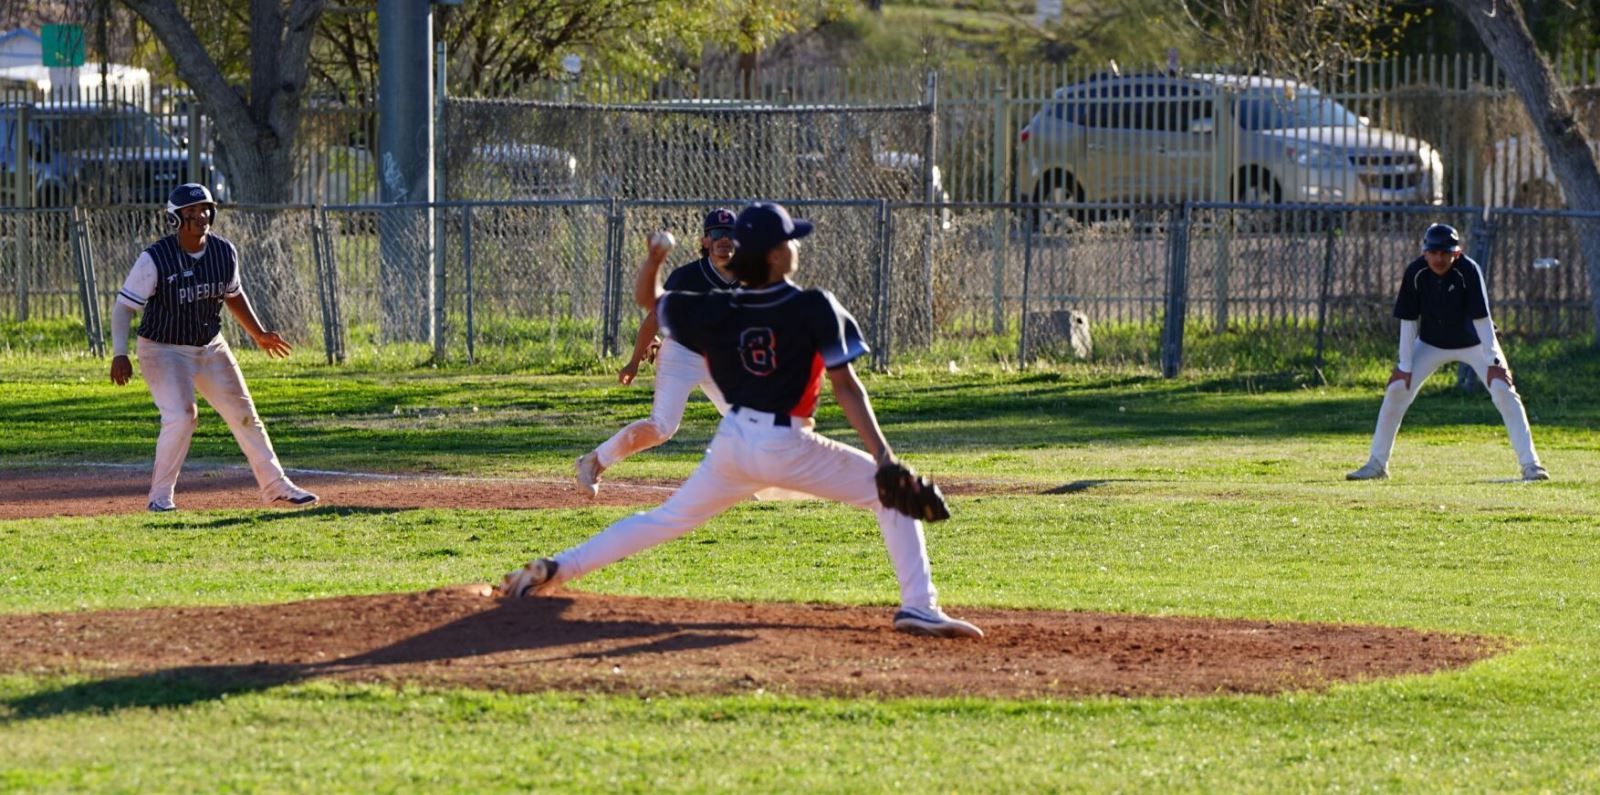 A Cholla baseball players throws out a pitch.